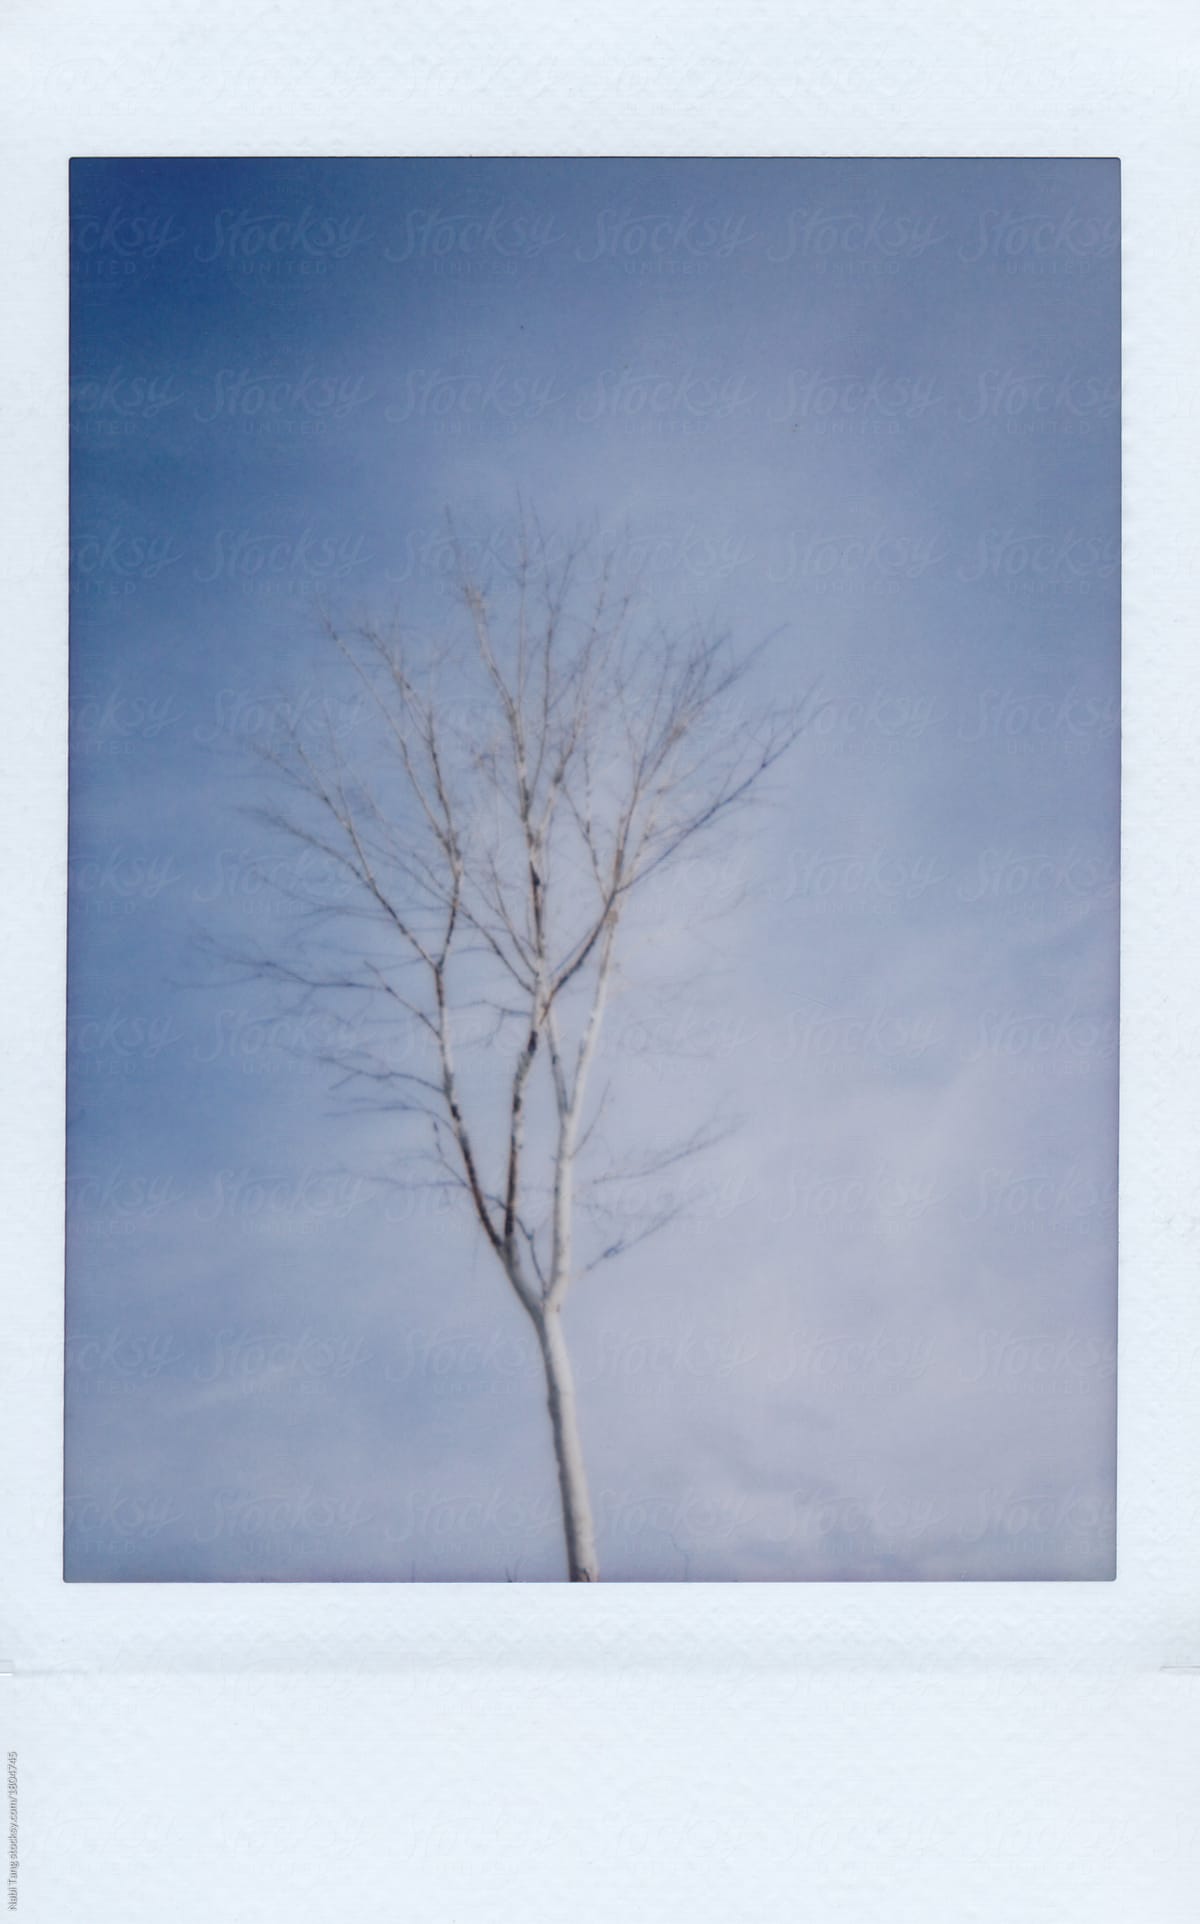 Instant mini polaroid image of a single tree without leaf in winter on blue sky background